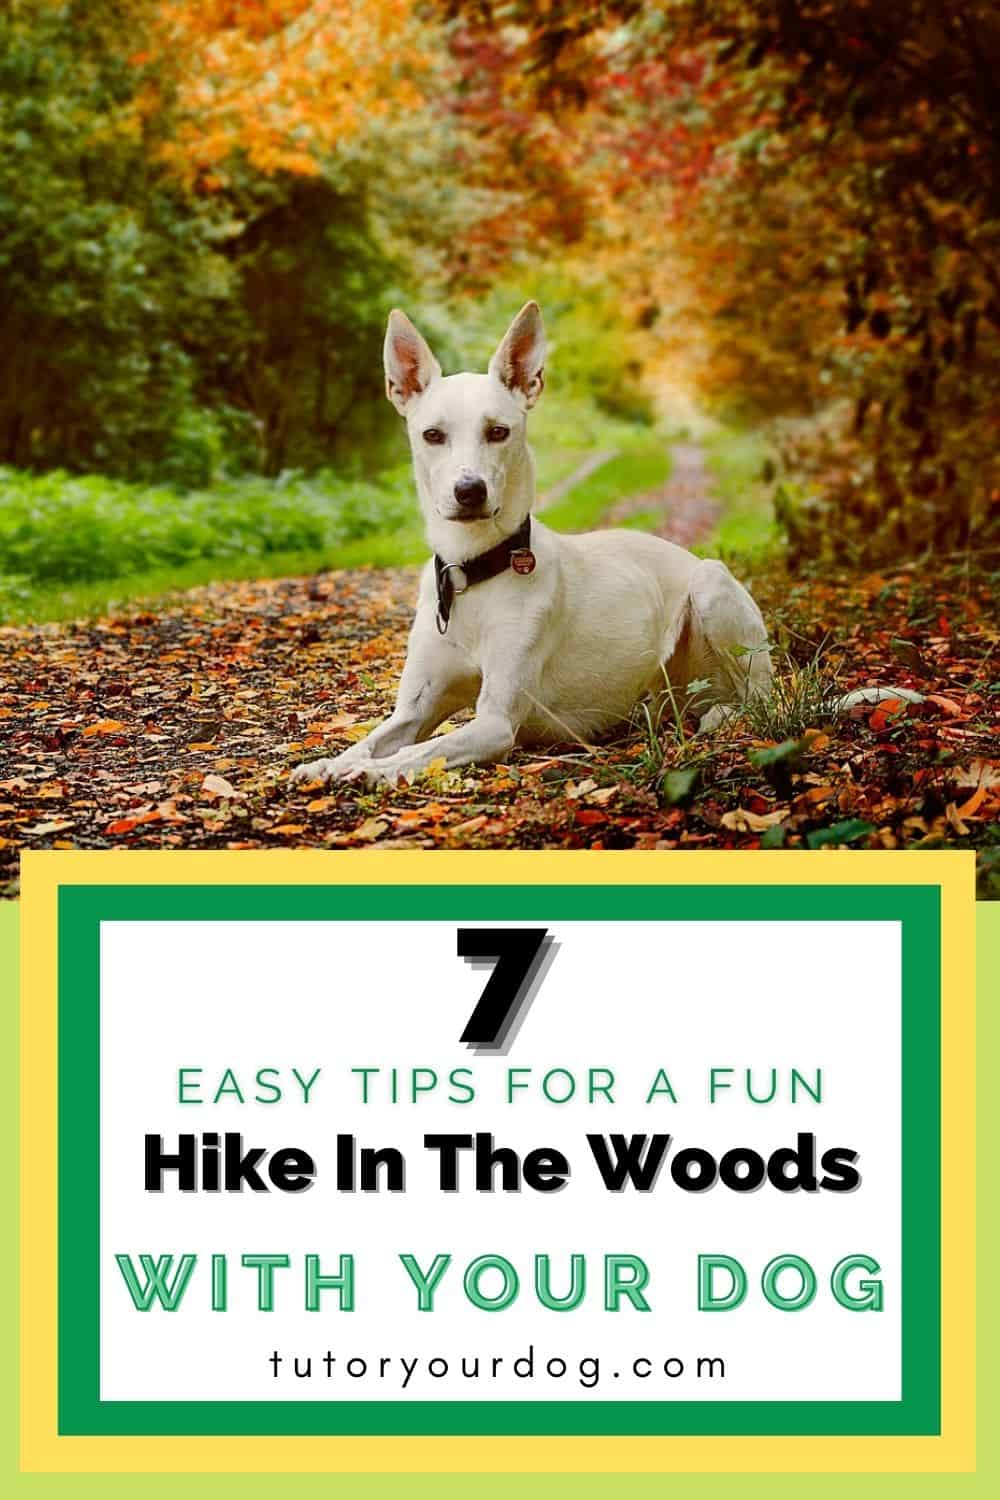 Hiking In The Woods With Your Dog